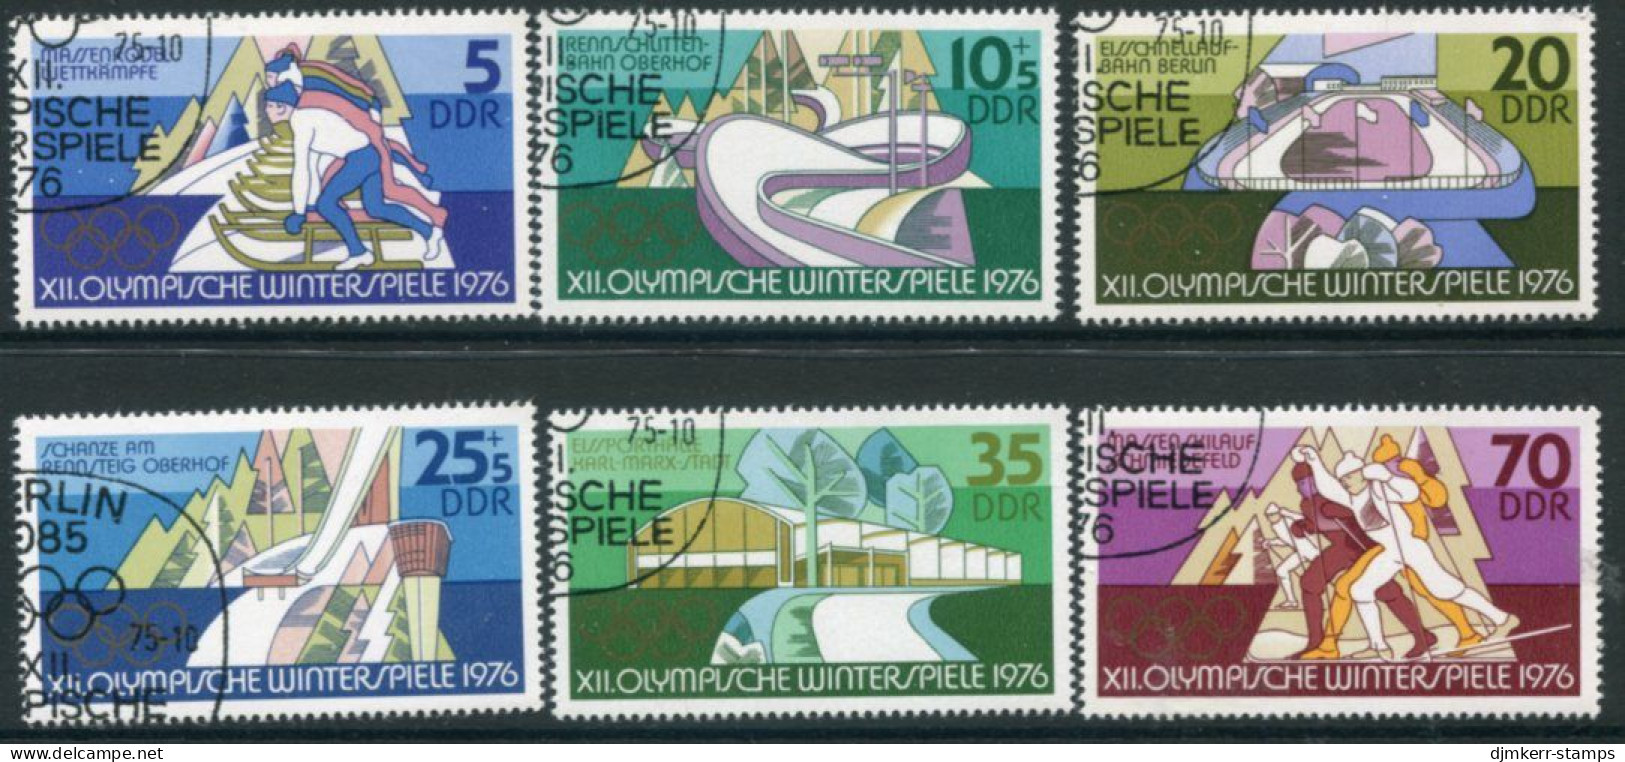 DDR / E. GERMANY 1975 Winter Olympic Games Used.  Michel 2099-104 - Usados